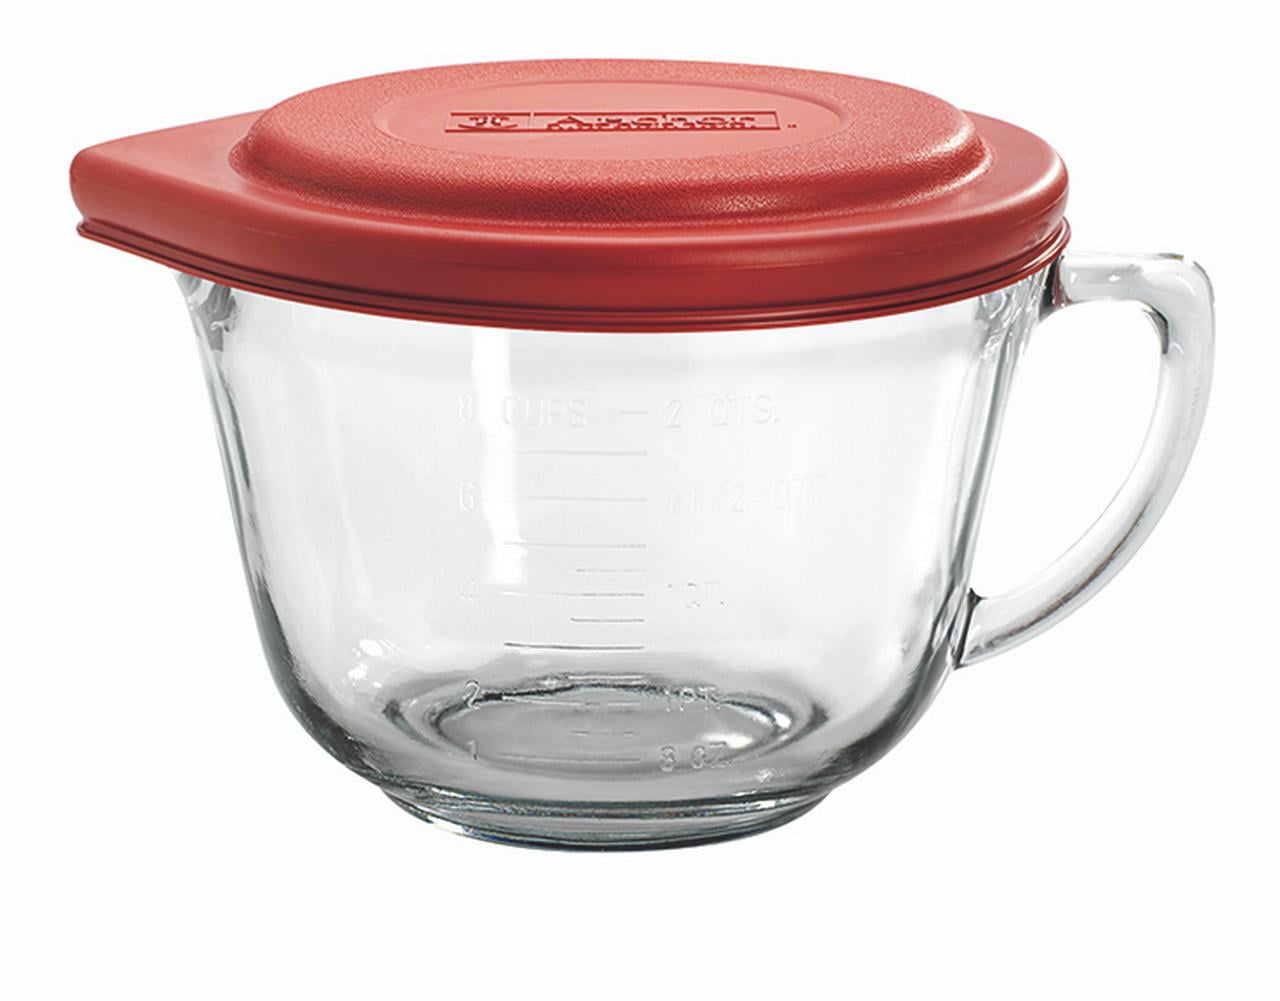 Anchor Hocking Batter Bowl with Red Lid, 2 qt